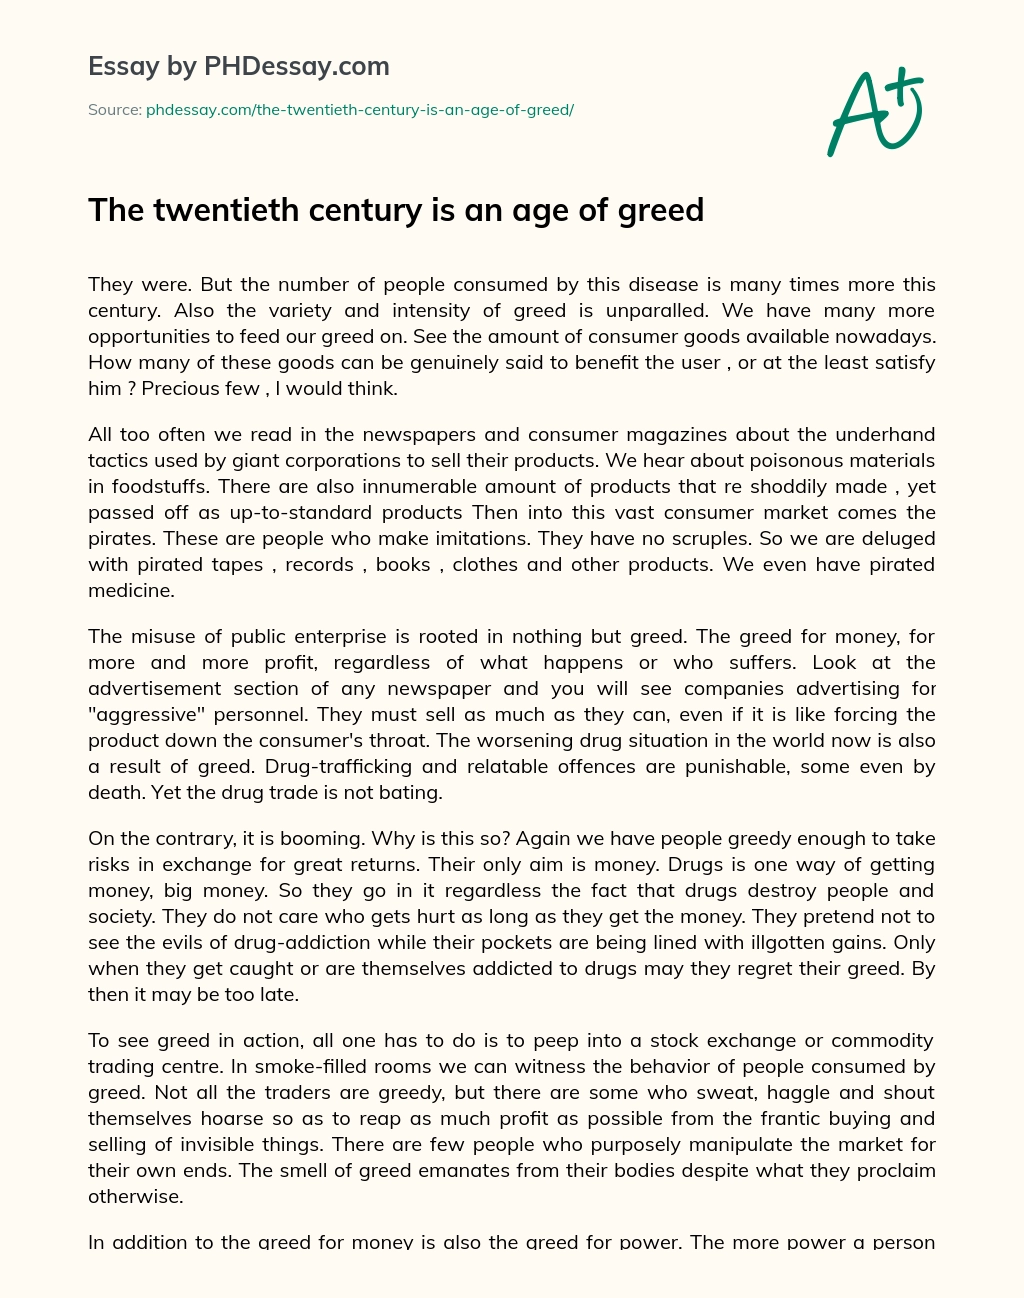 The twentieth century is an age of greed essay